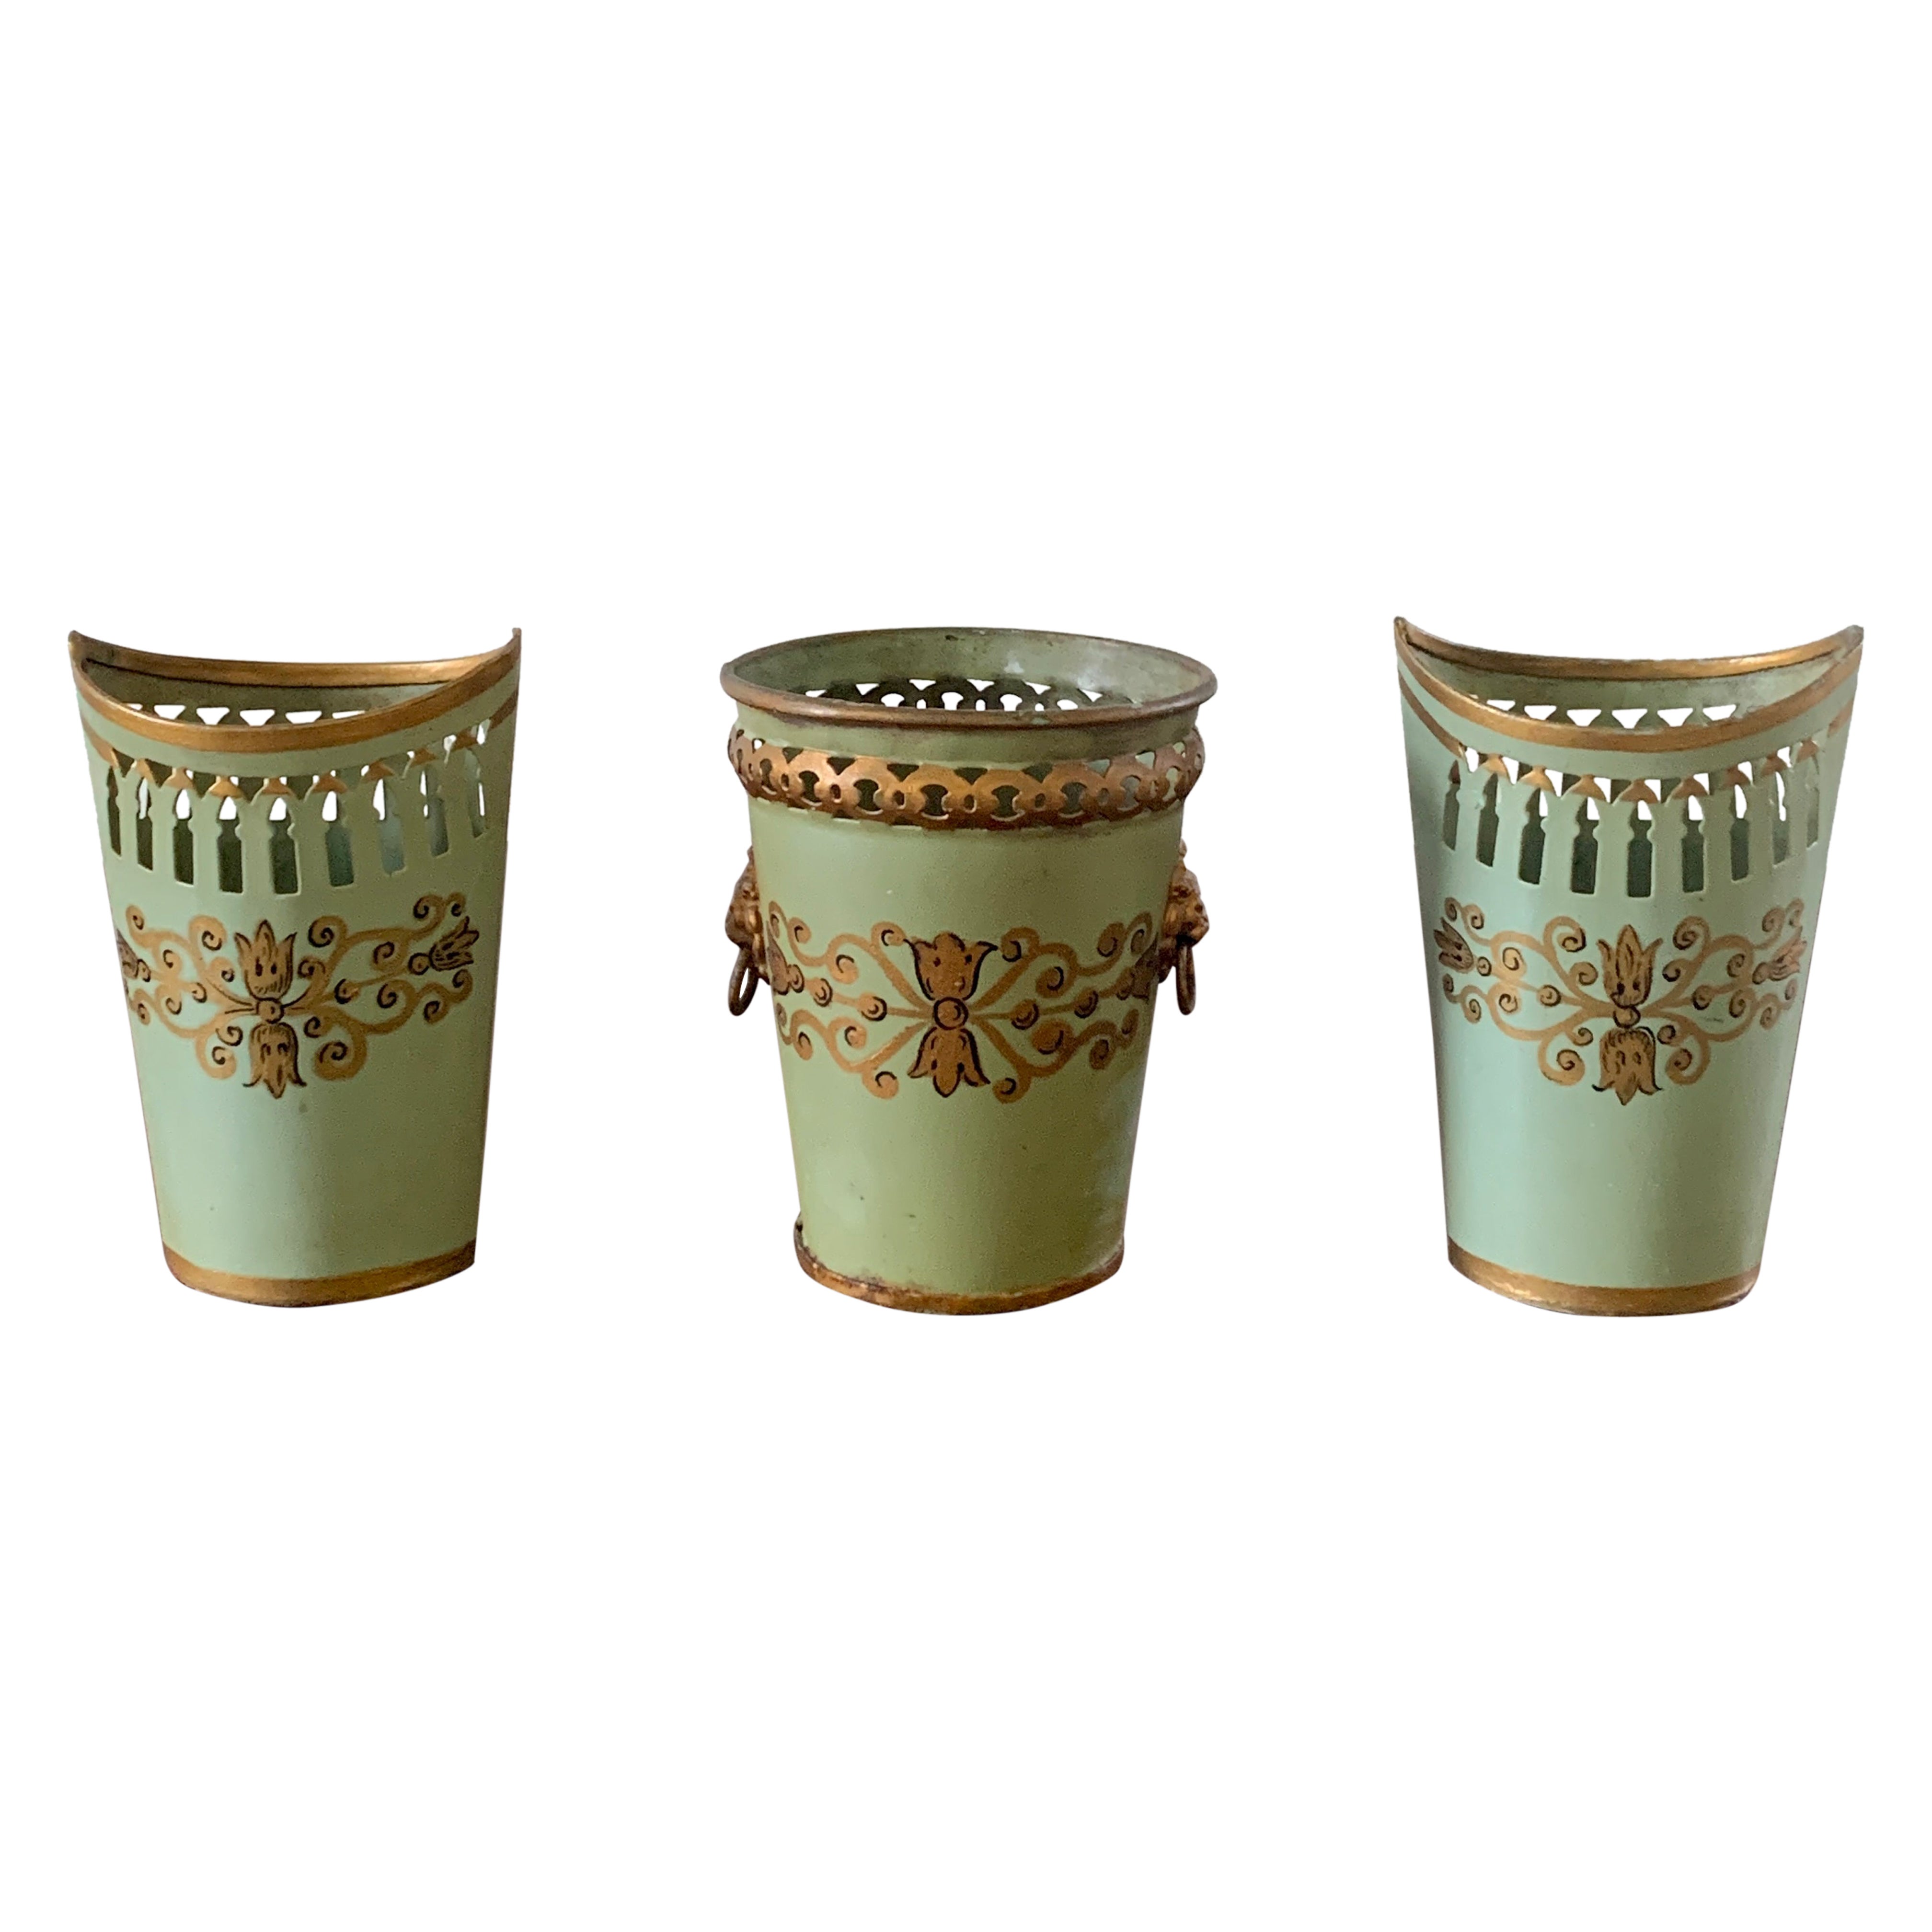 French Neoclassical Tole Green & Gold Cachepot Planter Vases, Set of 3